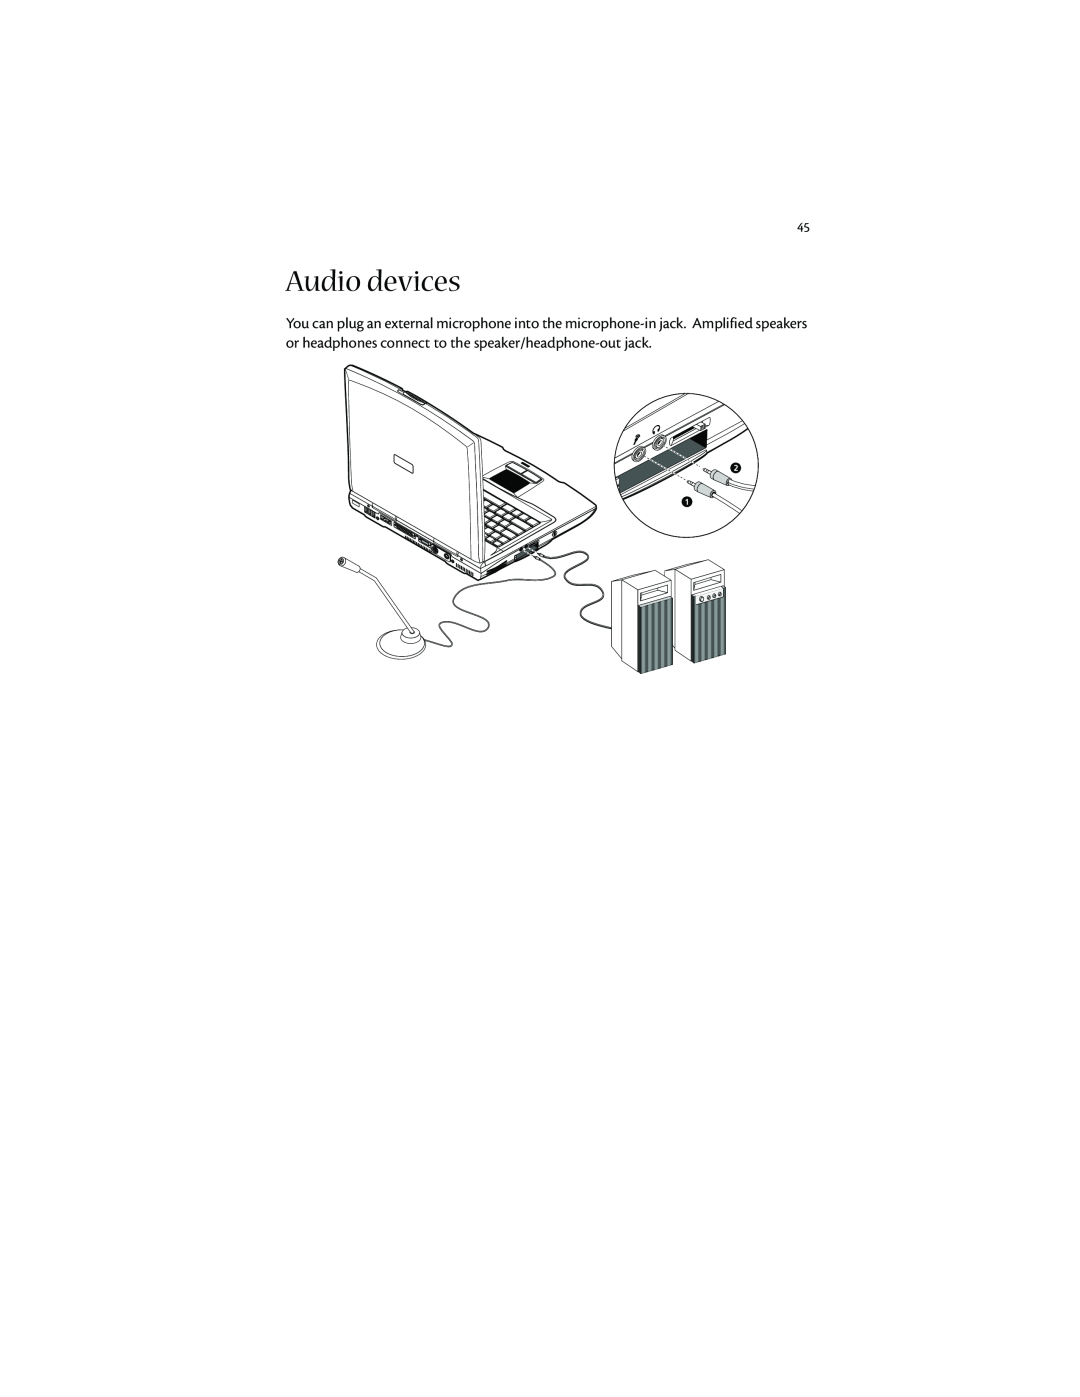 Acer 1400 manual Audio devices 